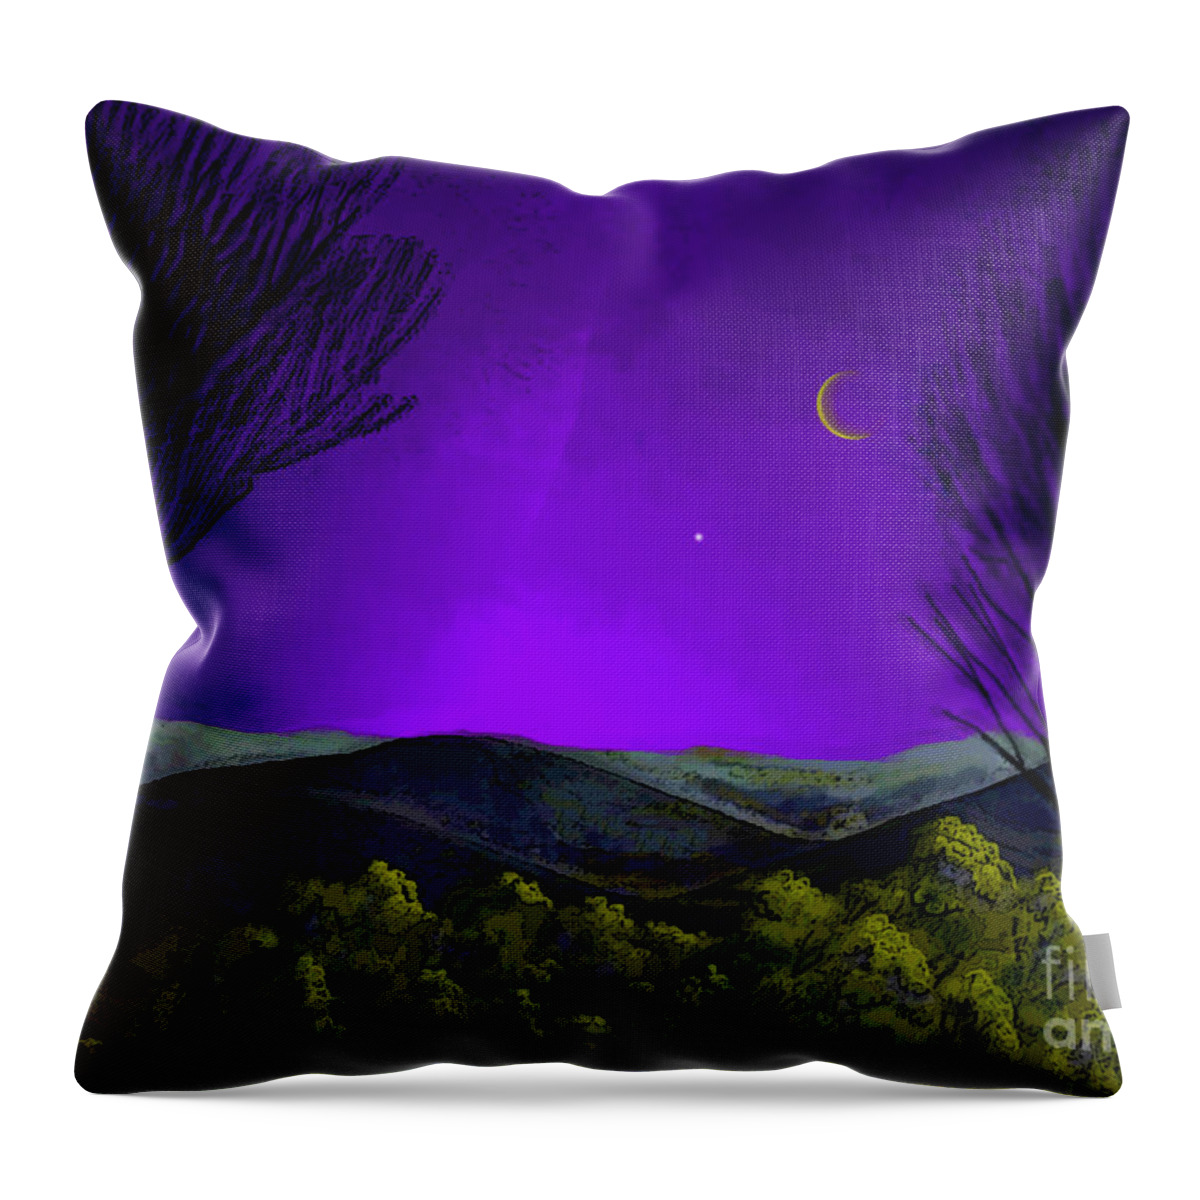 Purple Throw Pillow featuring the digital art Purple Sky by Carol Jacobs